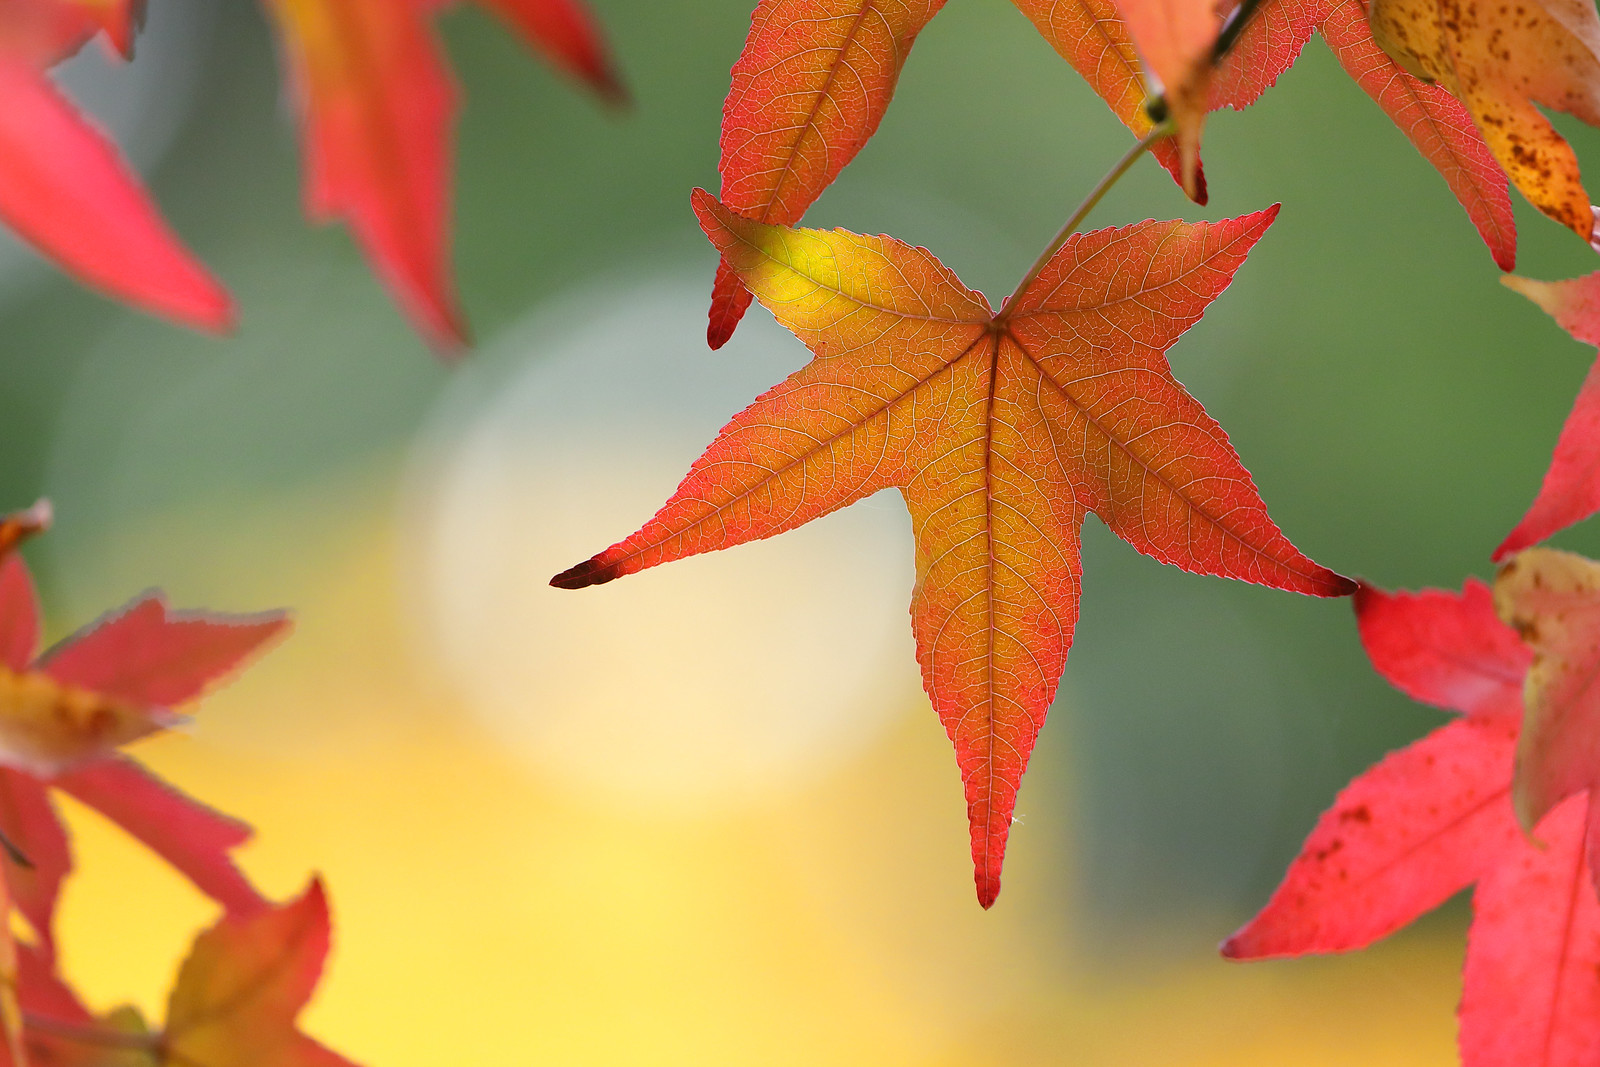 Japanese Maple Leaves in Autumn